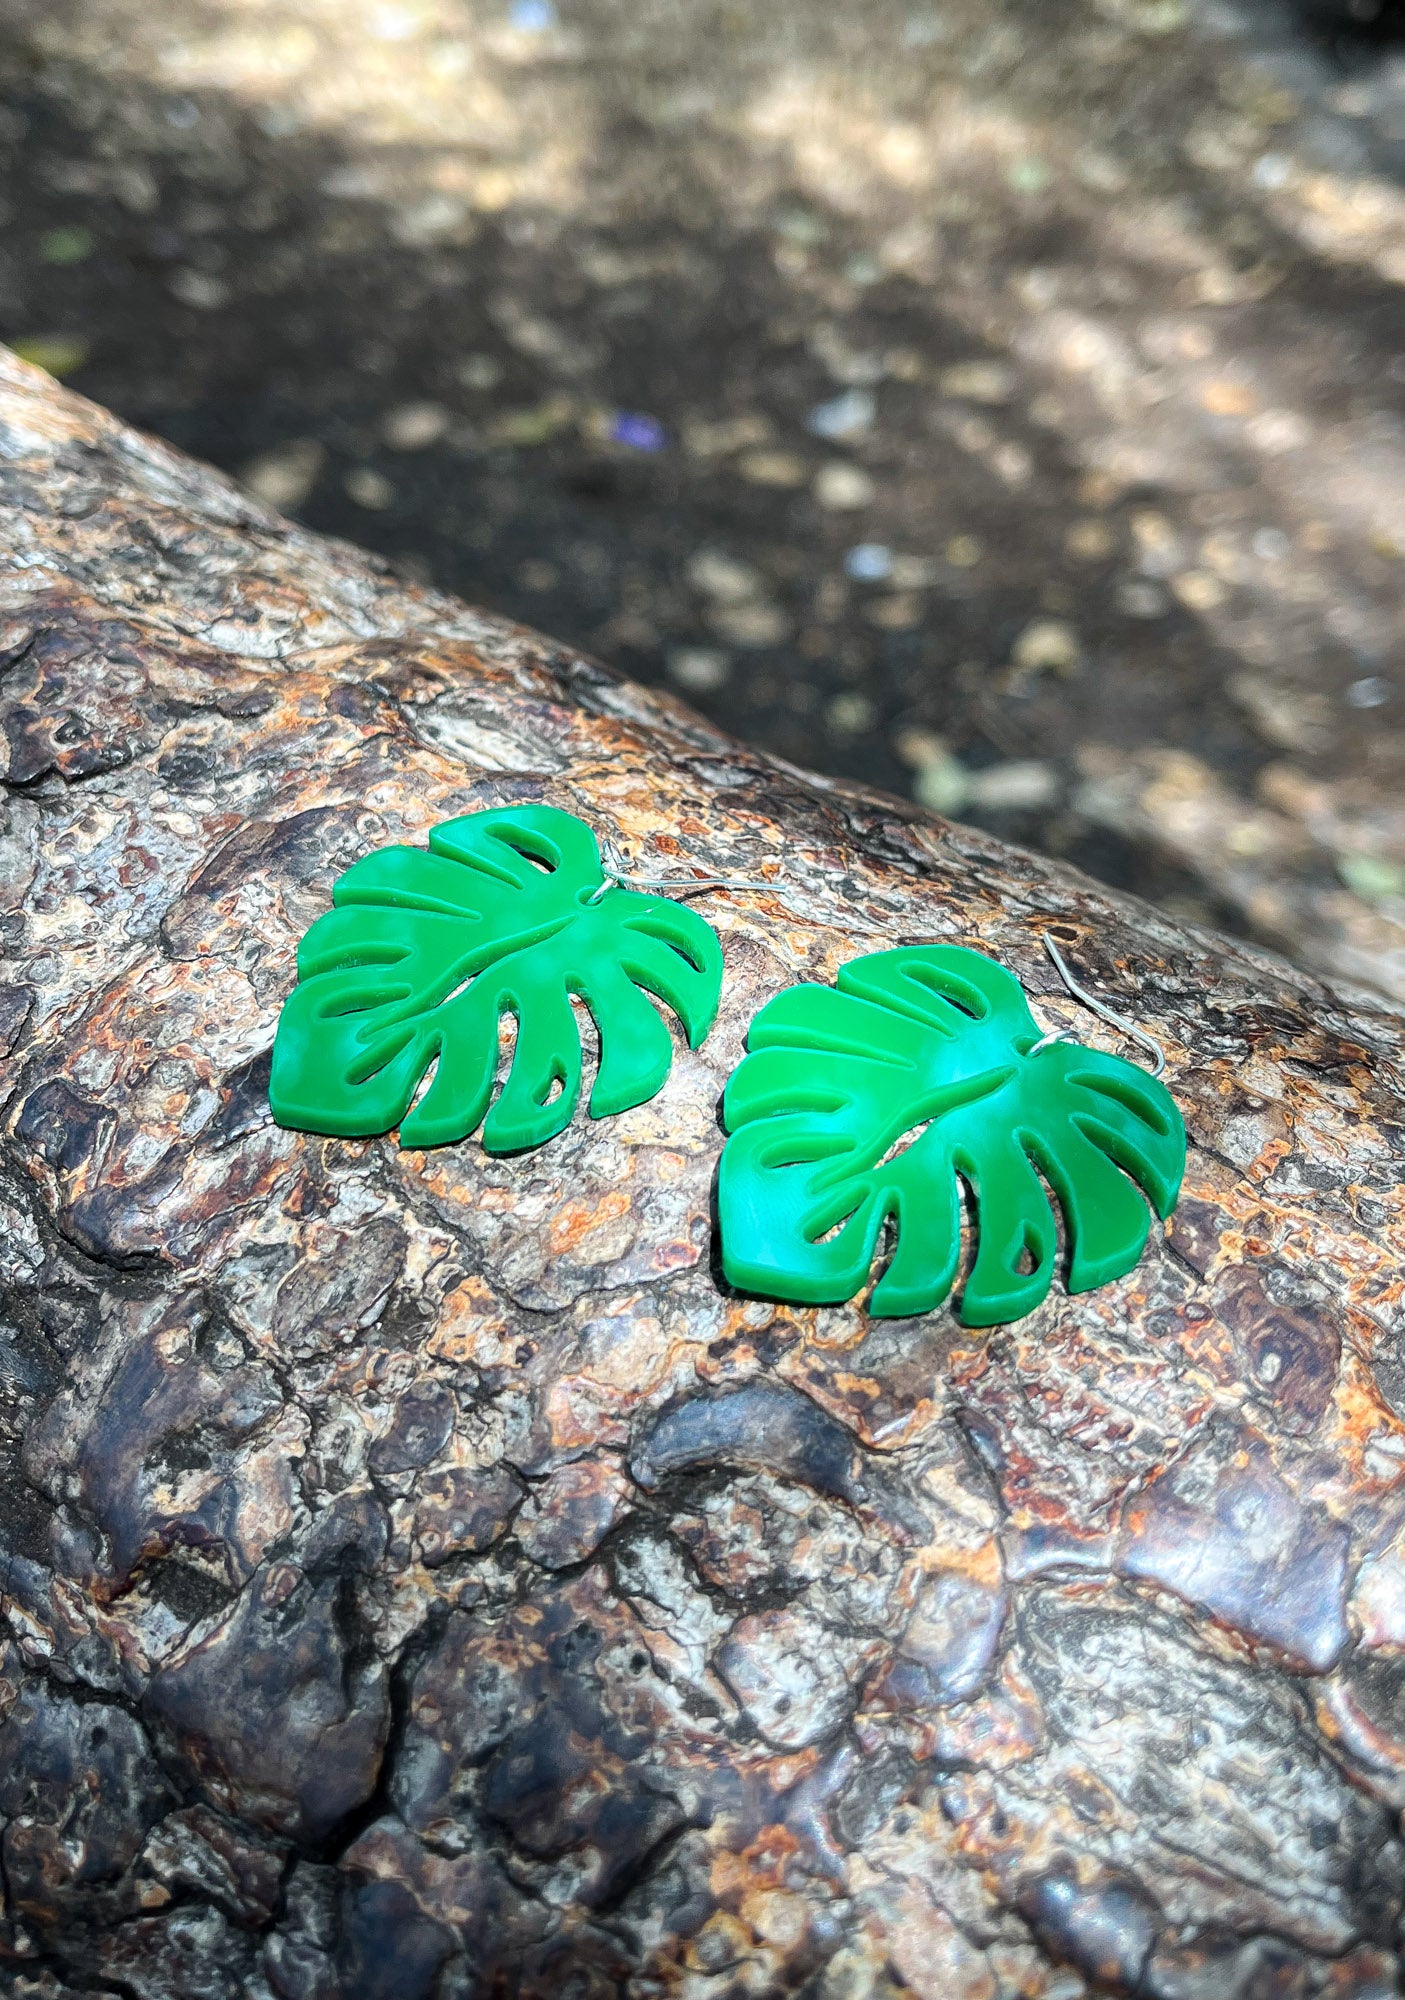 Green Acrylic Earrings in the shape of a Monstera leaf. Approximately 1.5" x 1.6"